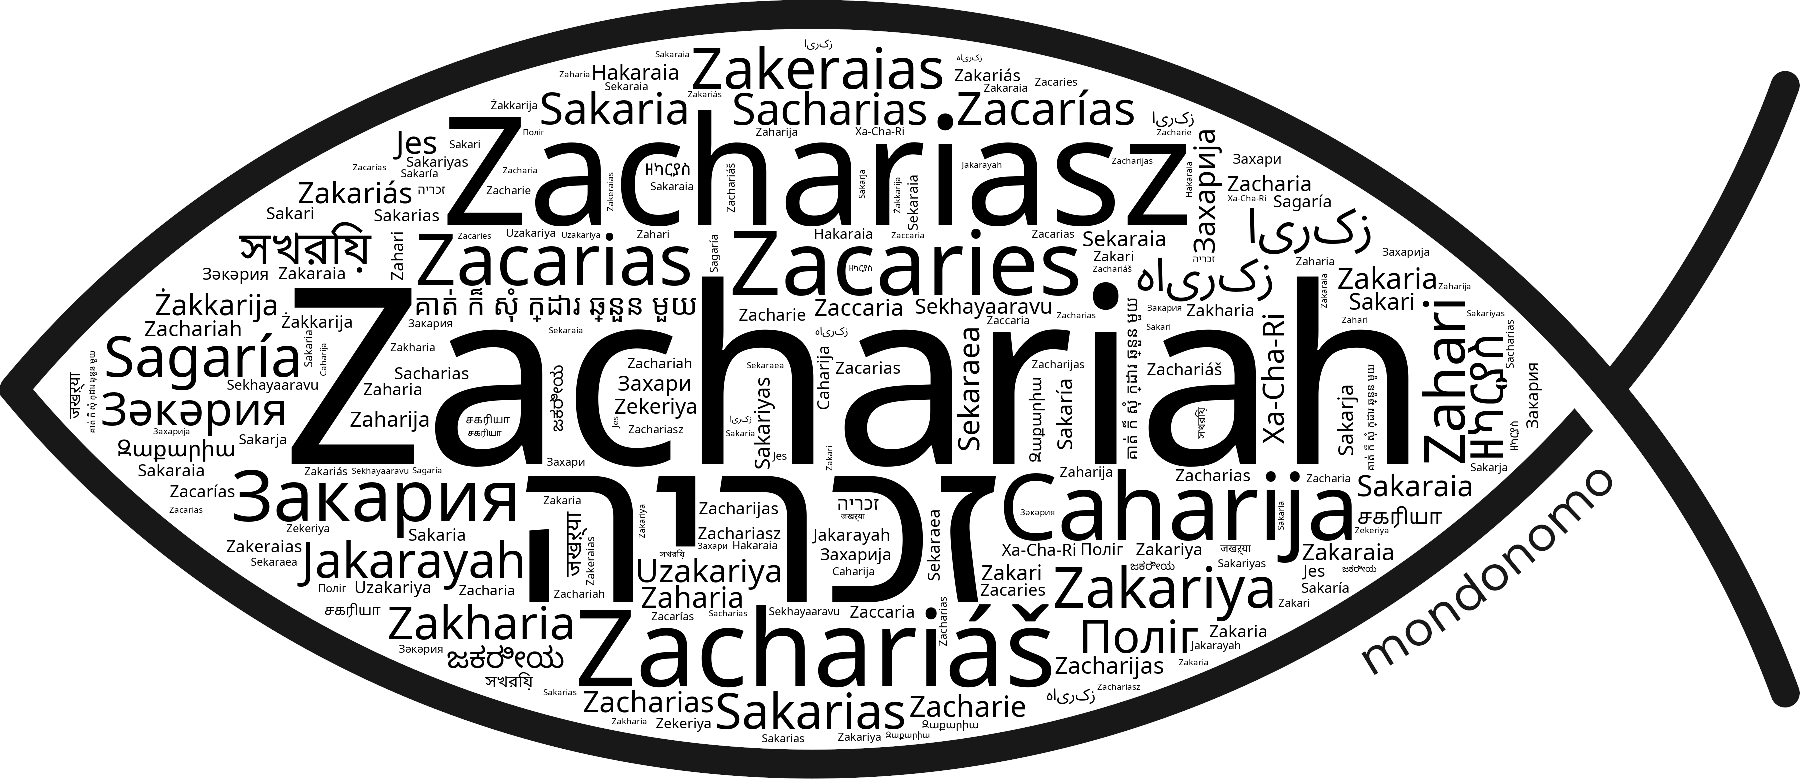 Name Zachariah in the world's Bibles